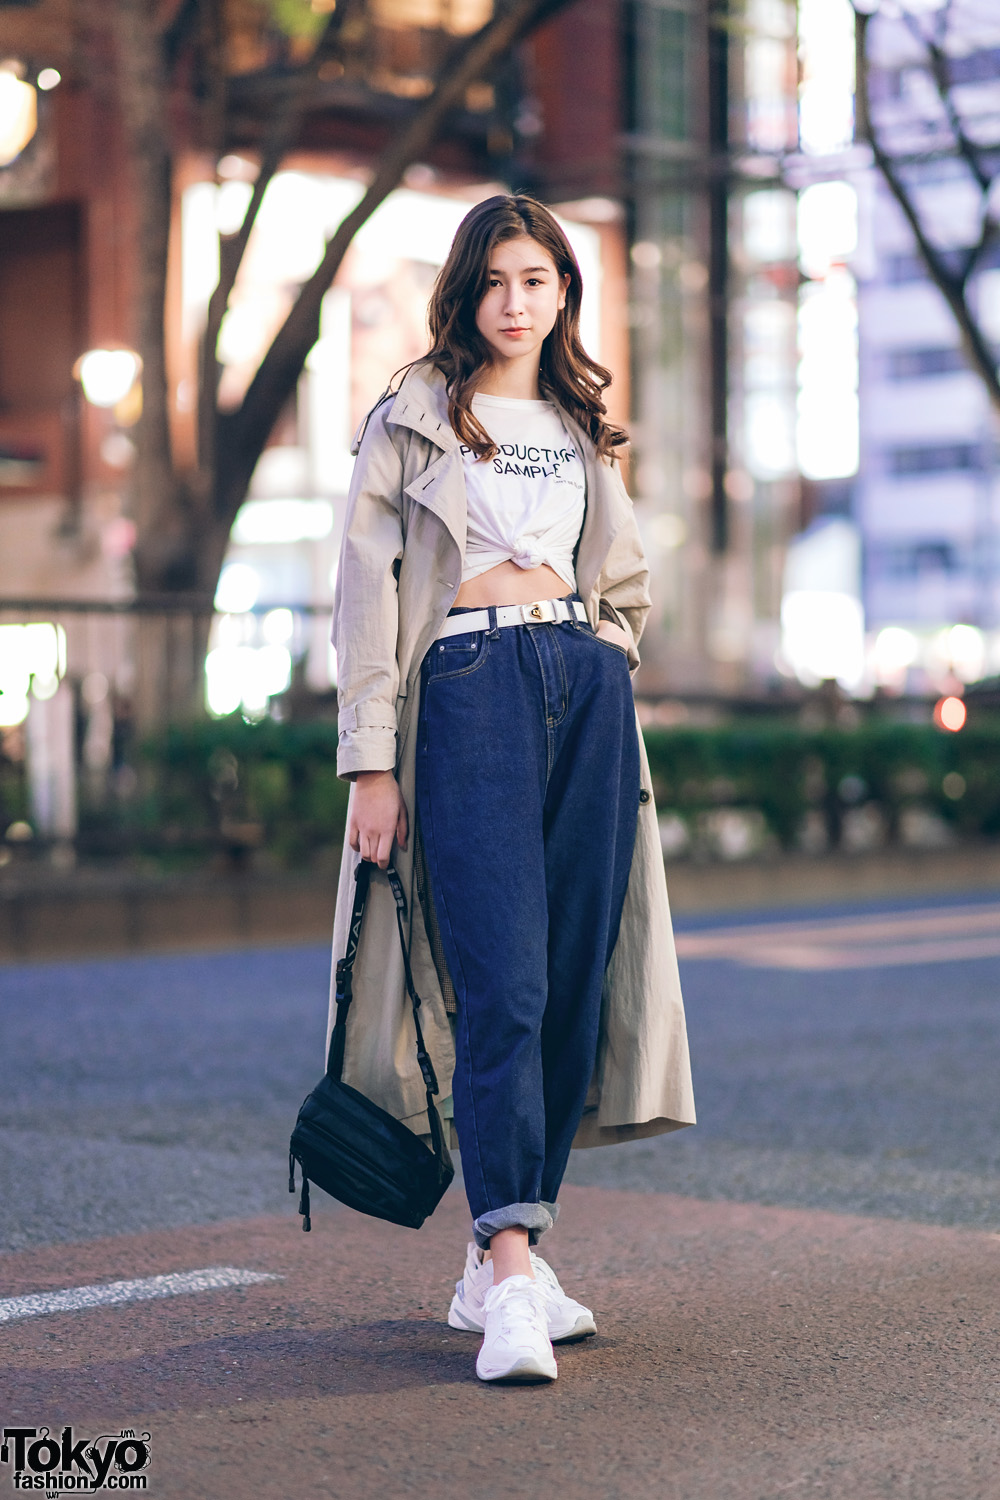 Japanese Model in Chic Casual Wear Style w/ Lace Glass Trench Coat, Zara Knotted Tee, Dior Belt, Boyfriend Jeans, Nike Sneakers & Laval Bag